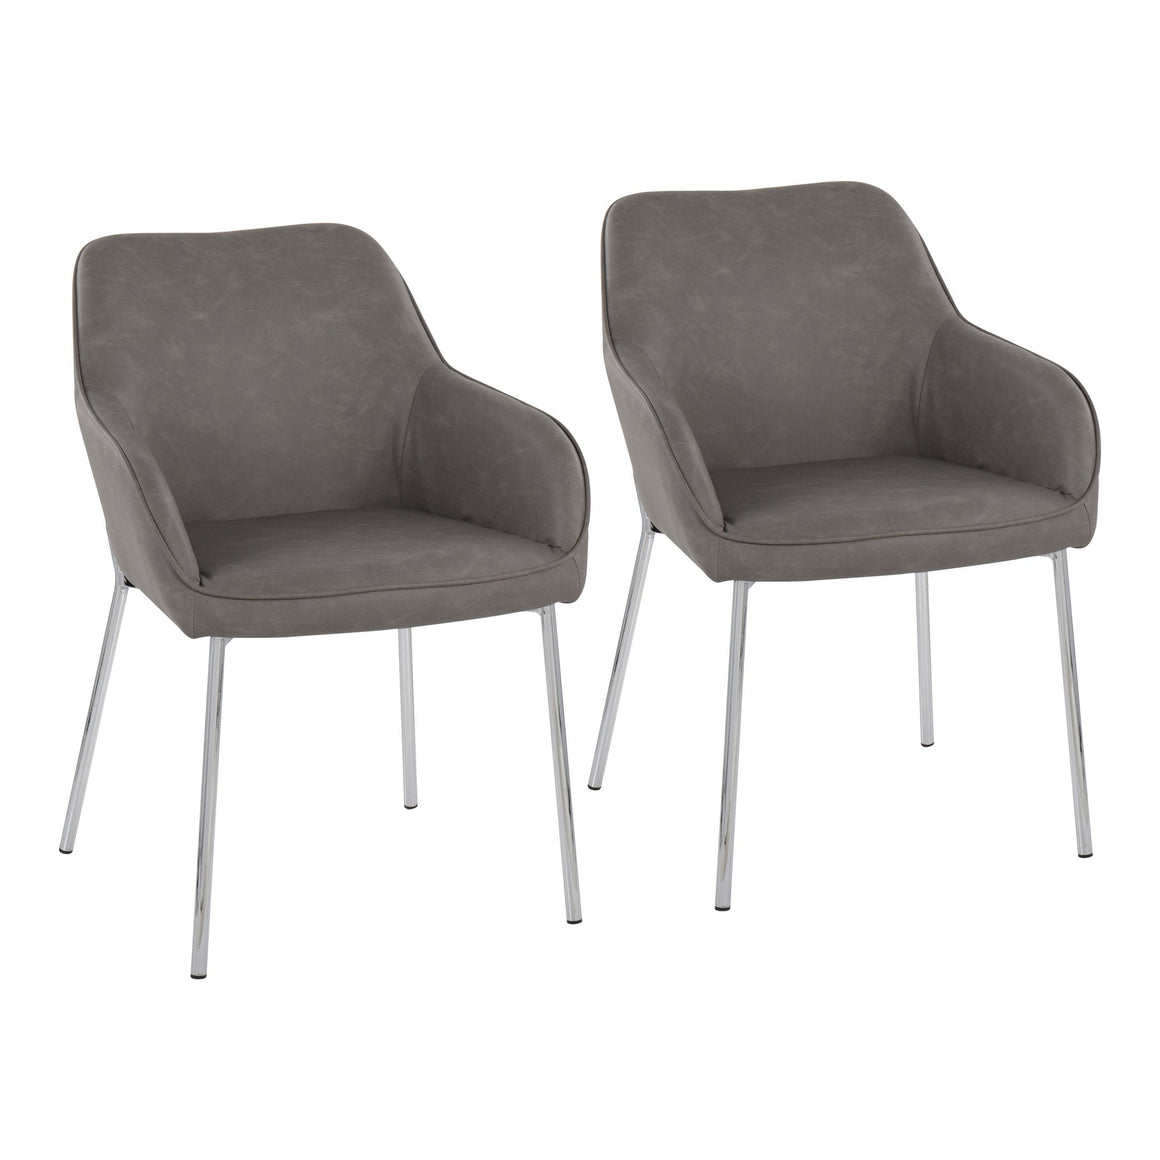 Daniella Contemporary Dining Chair in Chrome Steel and Grey Faux Leather by LumiSource - Set of 2